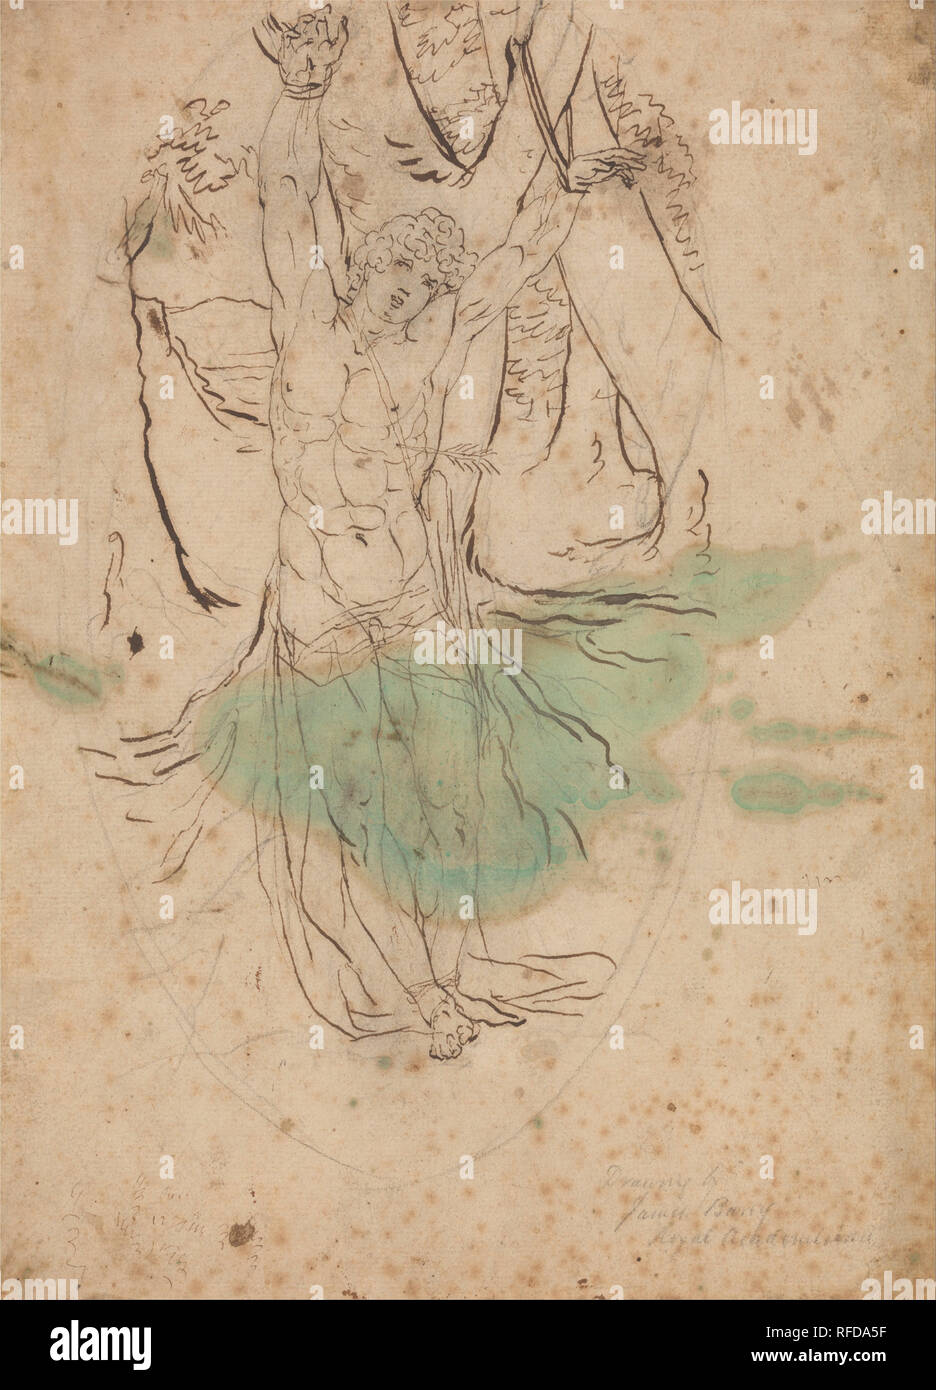 Study for Saint Sebastian. Drawing. Pen and brown ink, gouache and graphite on thin, slightly textured, beige laid paper. Height: 260 mm (10.23 in); Width: 191 mm (7.51 in). Author: James Barry. Stock Photo